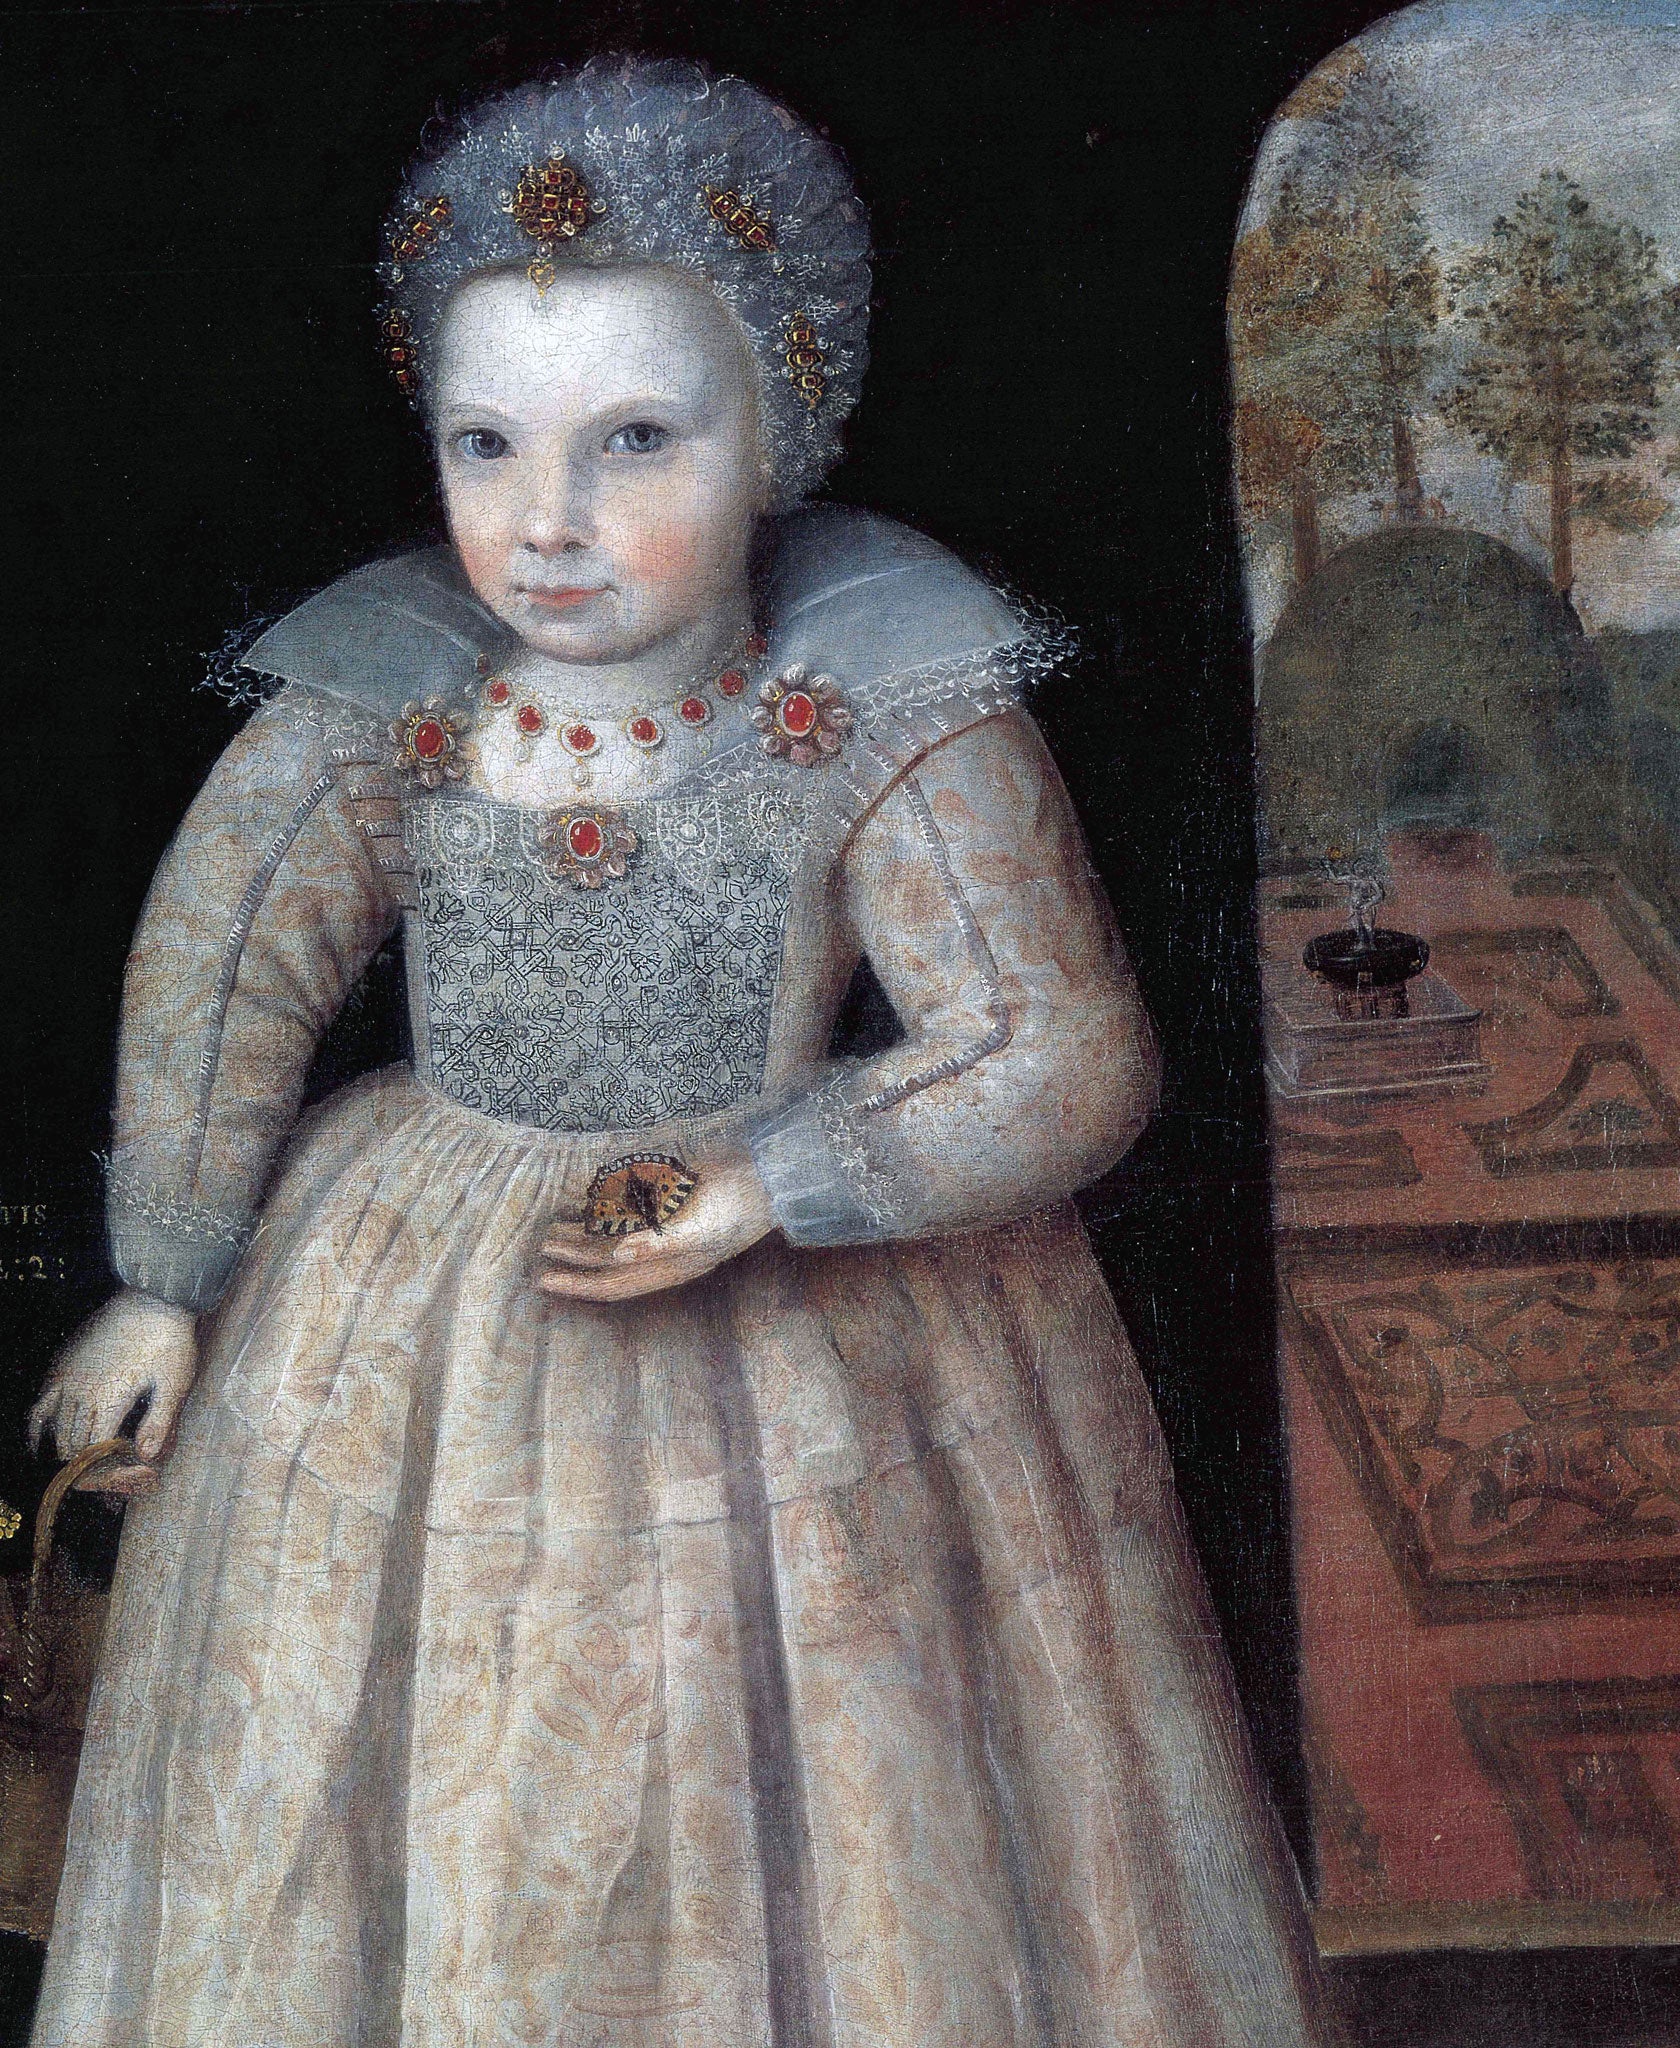 Two-year-old Lettice Newdigate in her embroidered bodice